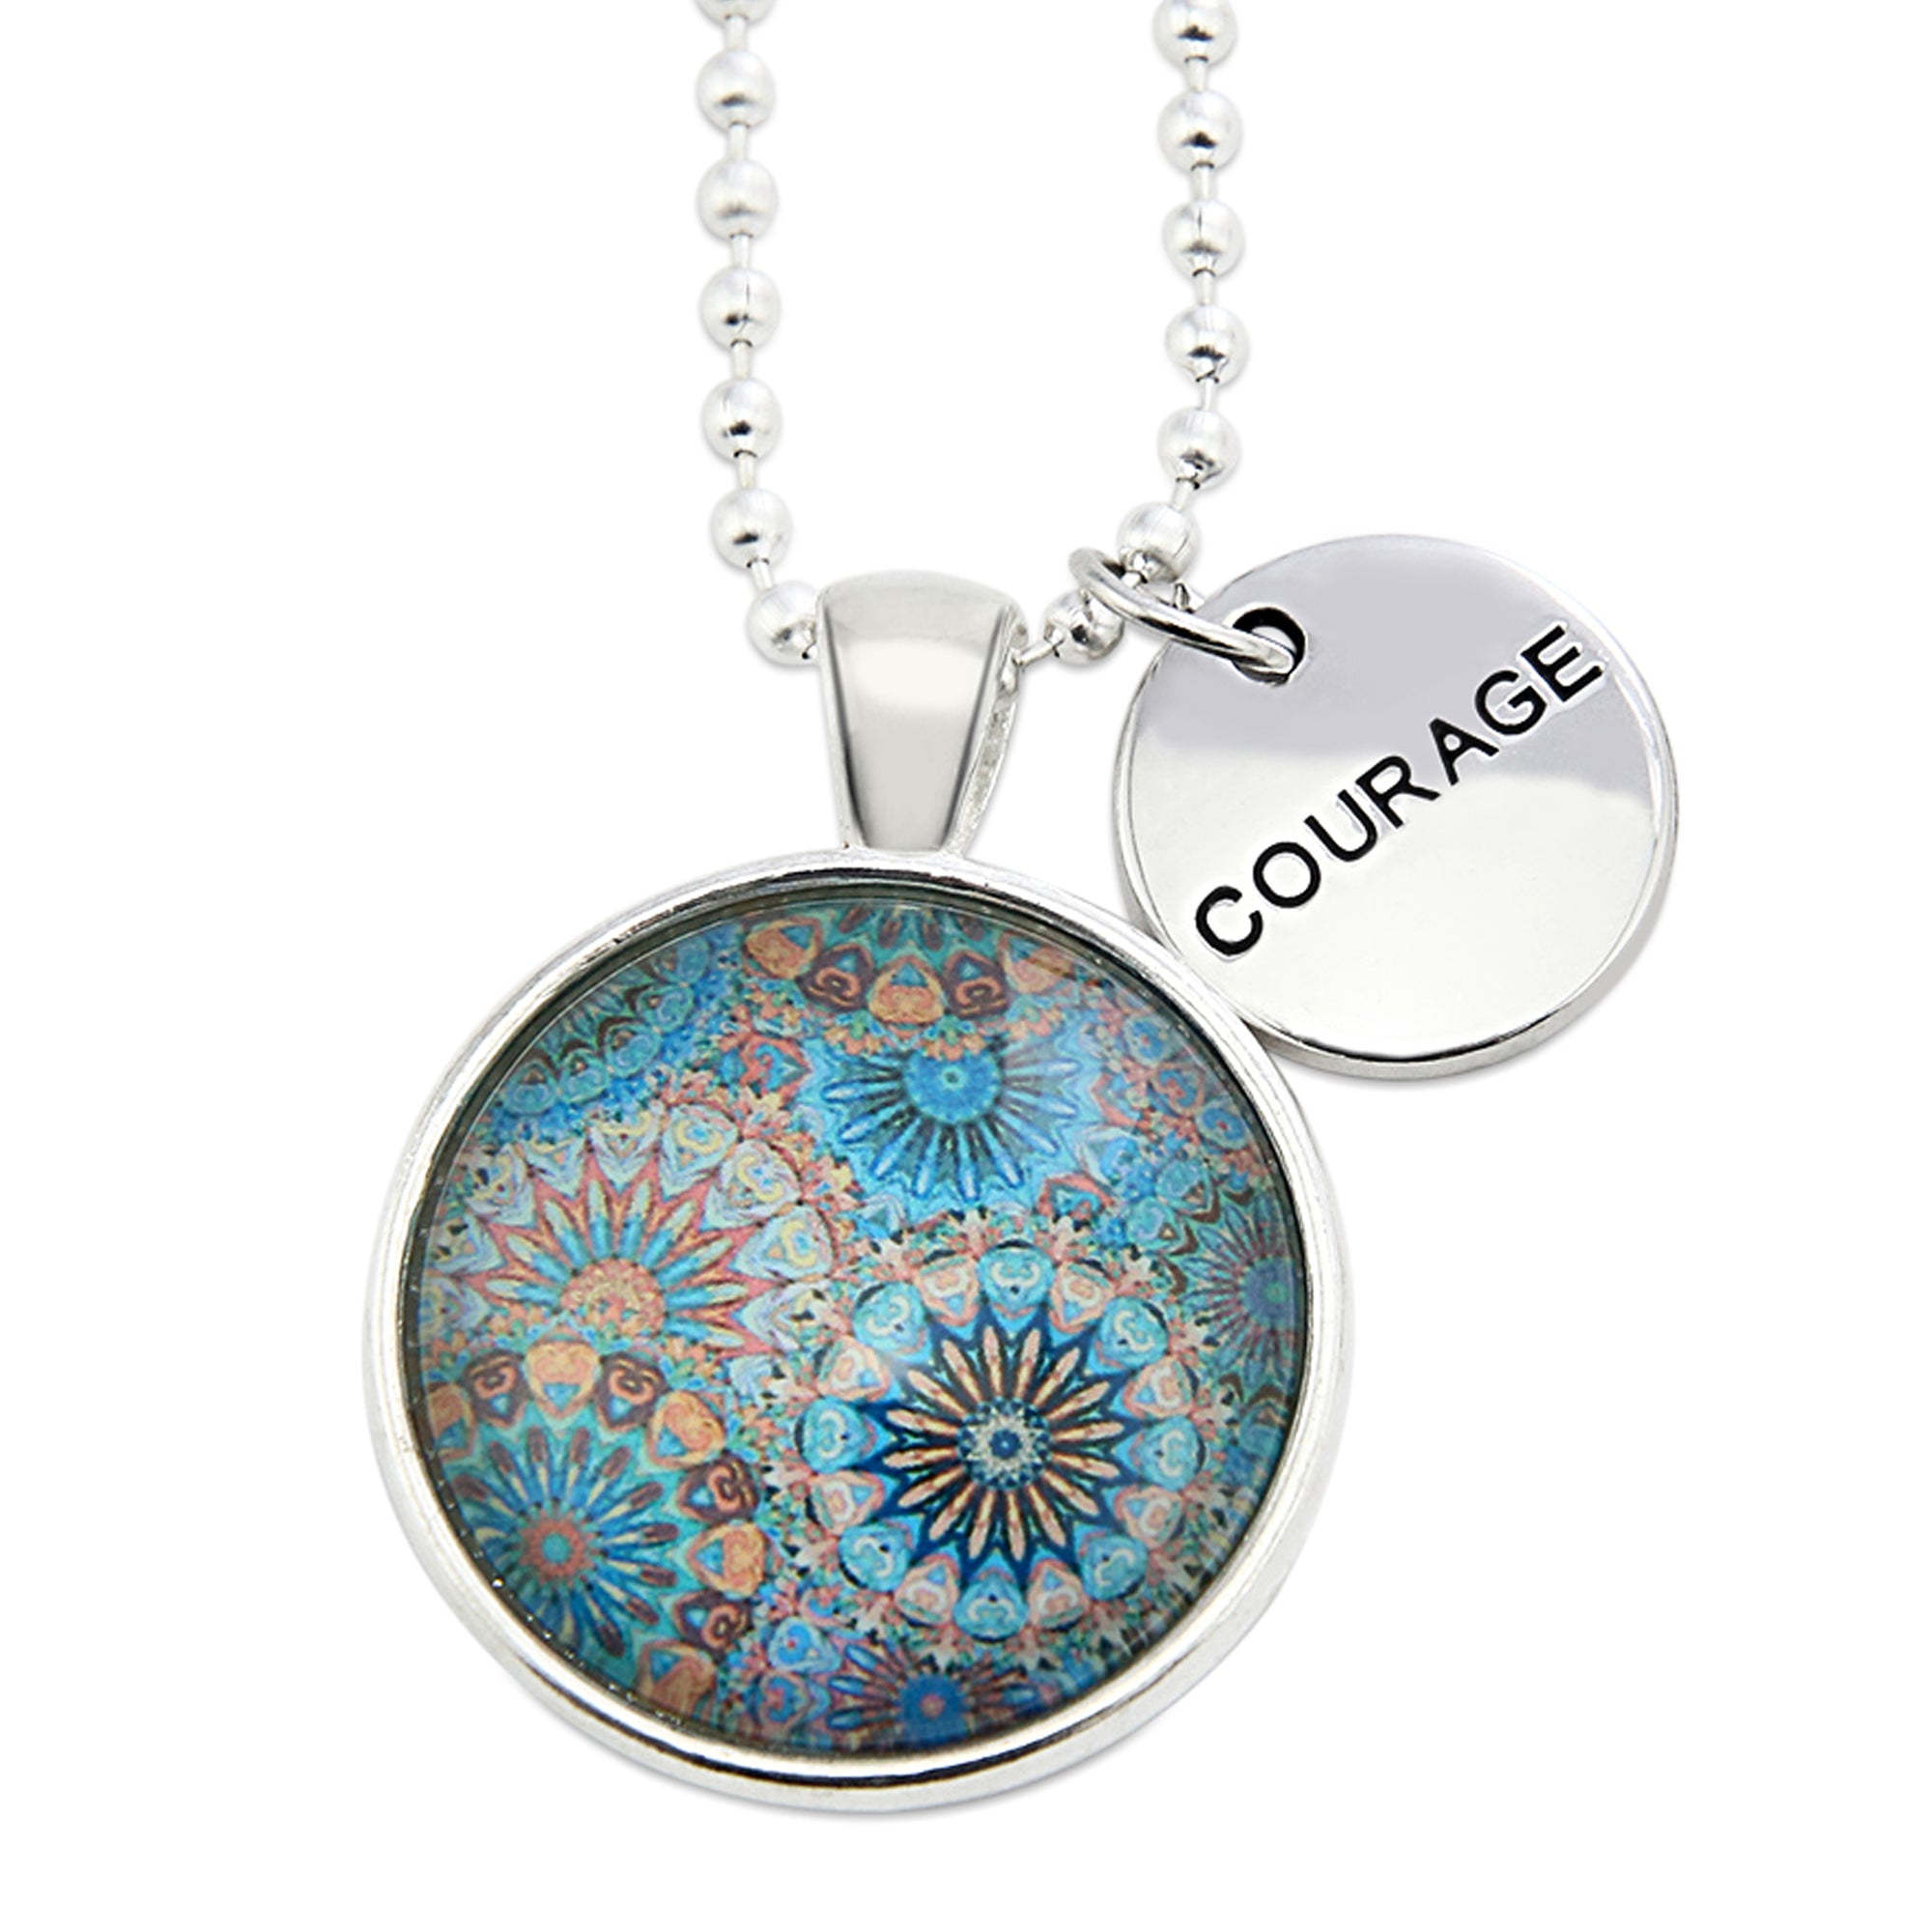 Teal print mandala pendant necklace in bright silver with courage charm. 